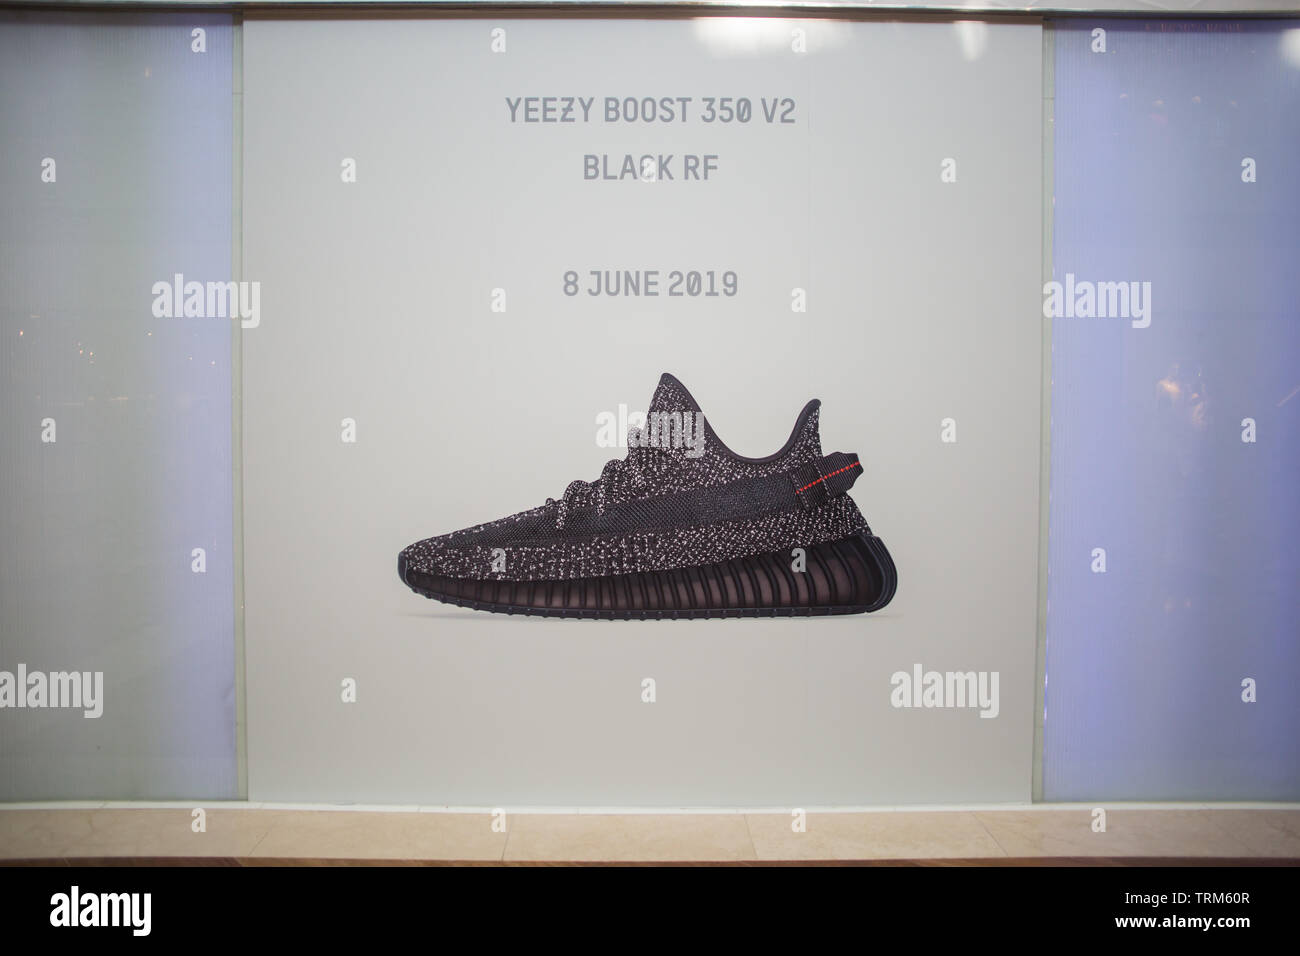 Release of Adidas Yeezy Boost 350V2 